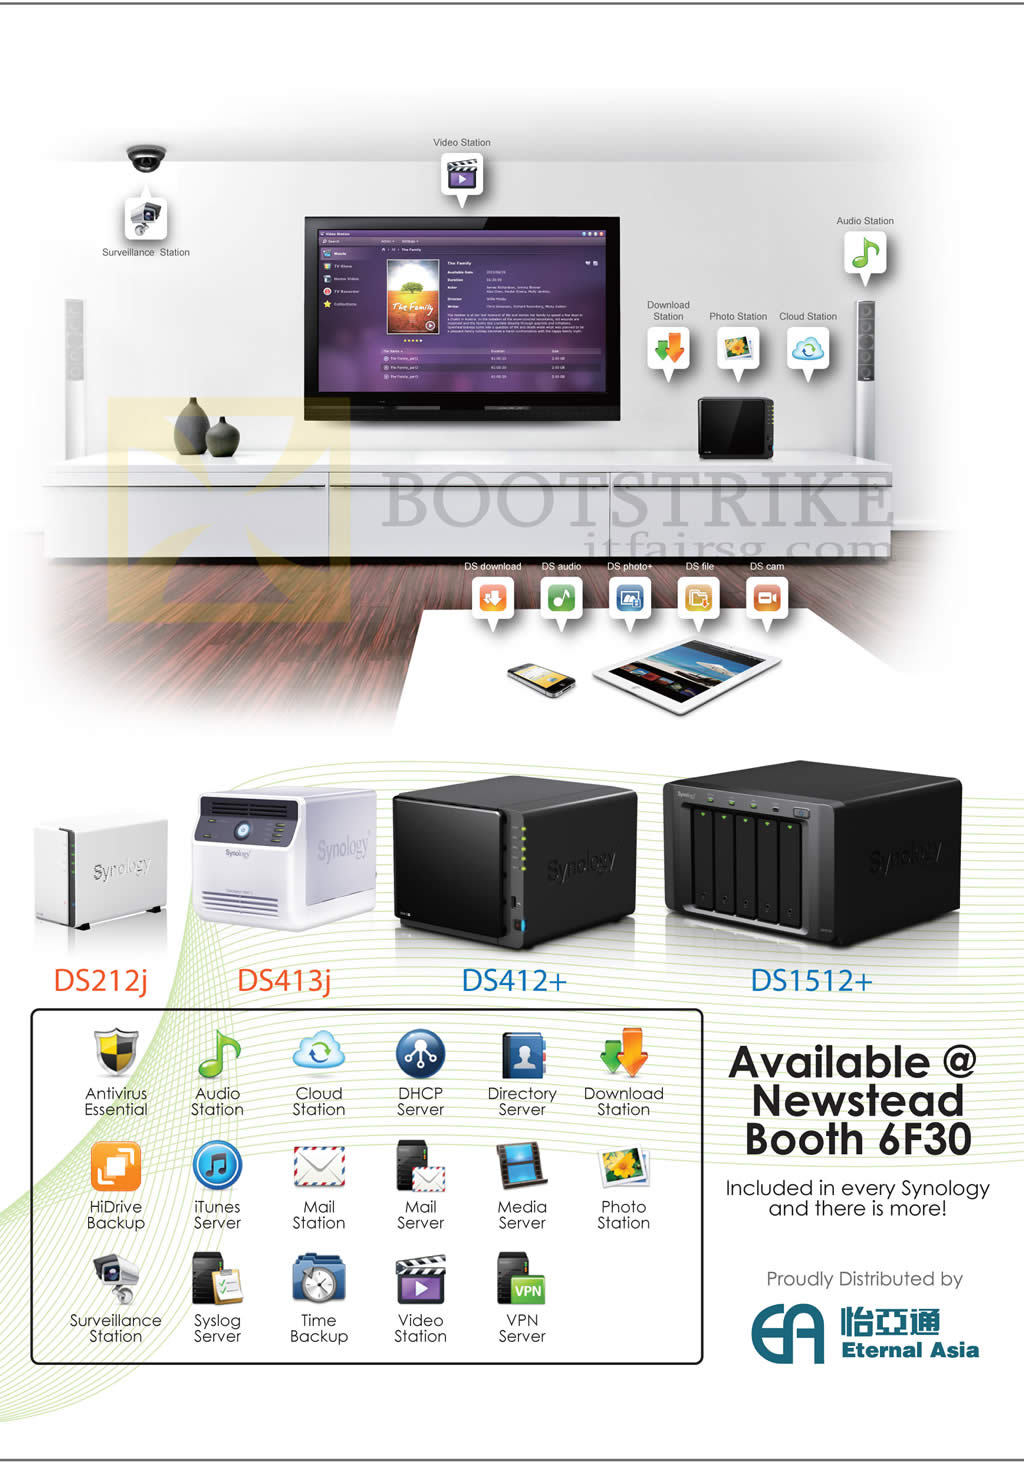 SITEX 2012 price list image brochure of Newstead Synology NAS DS212j, DS413j, DS412 Plus, DS1512 Plus Features